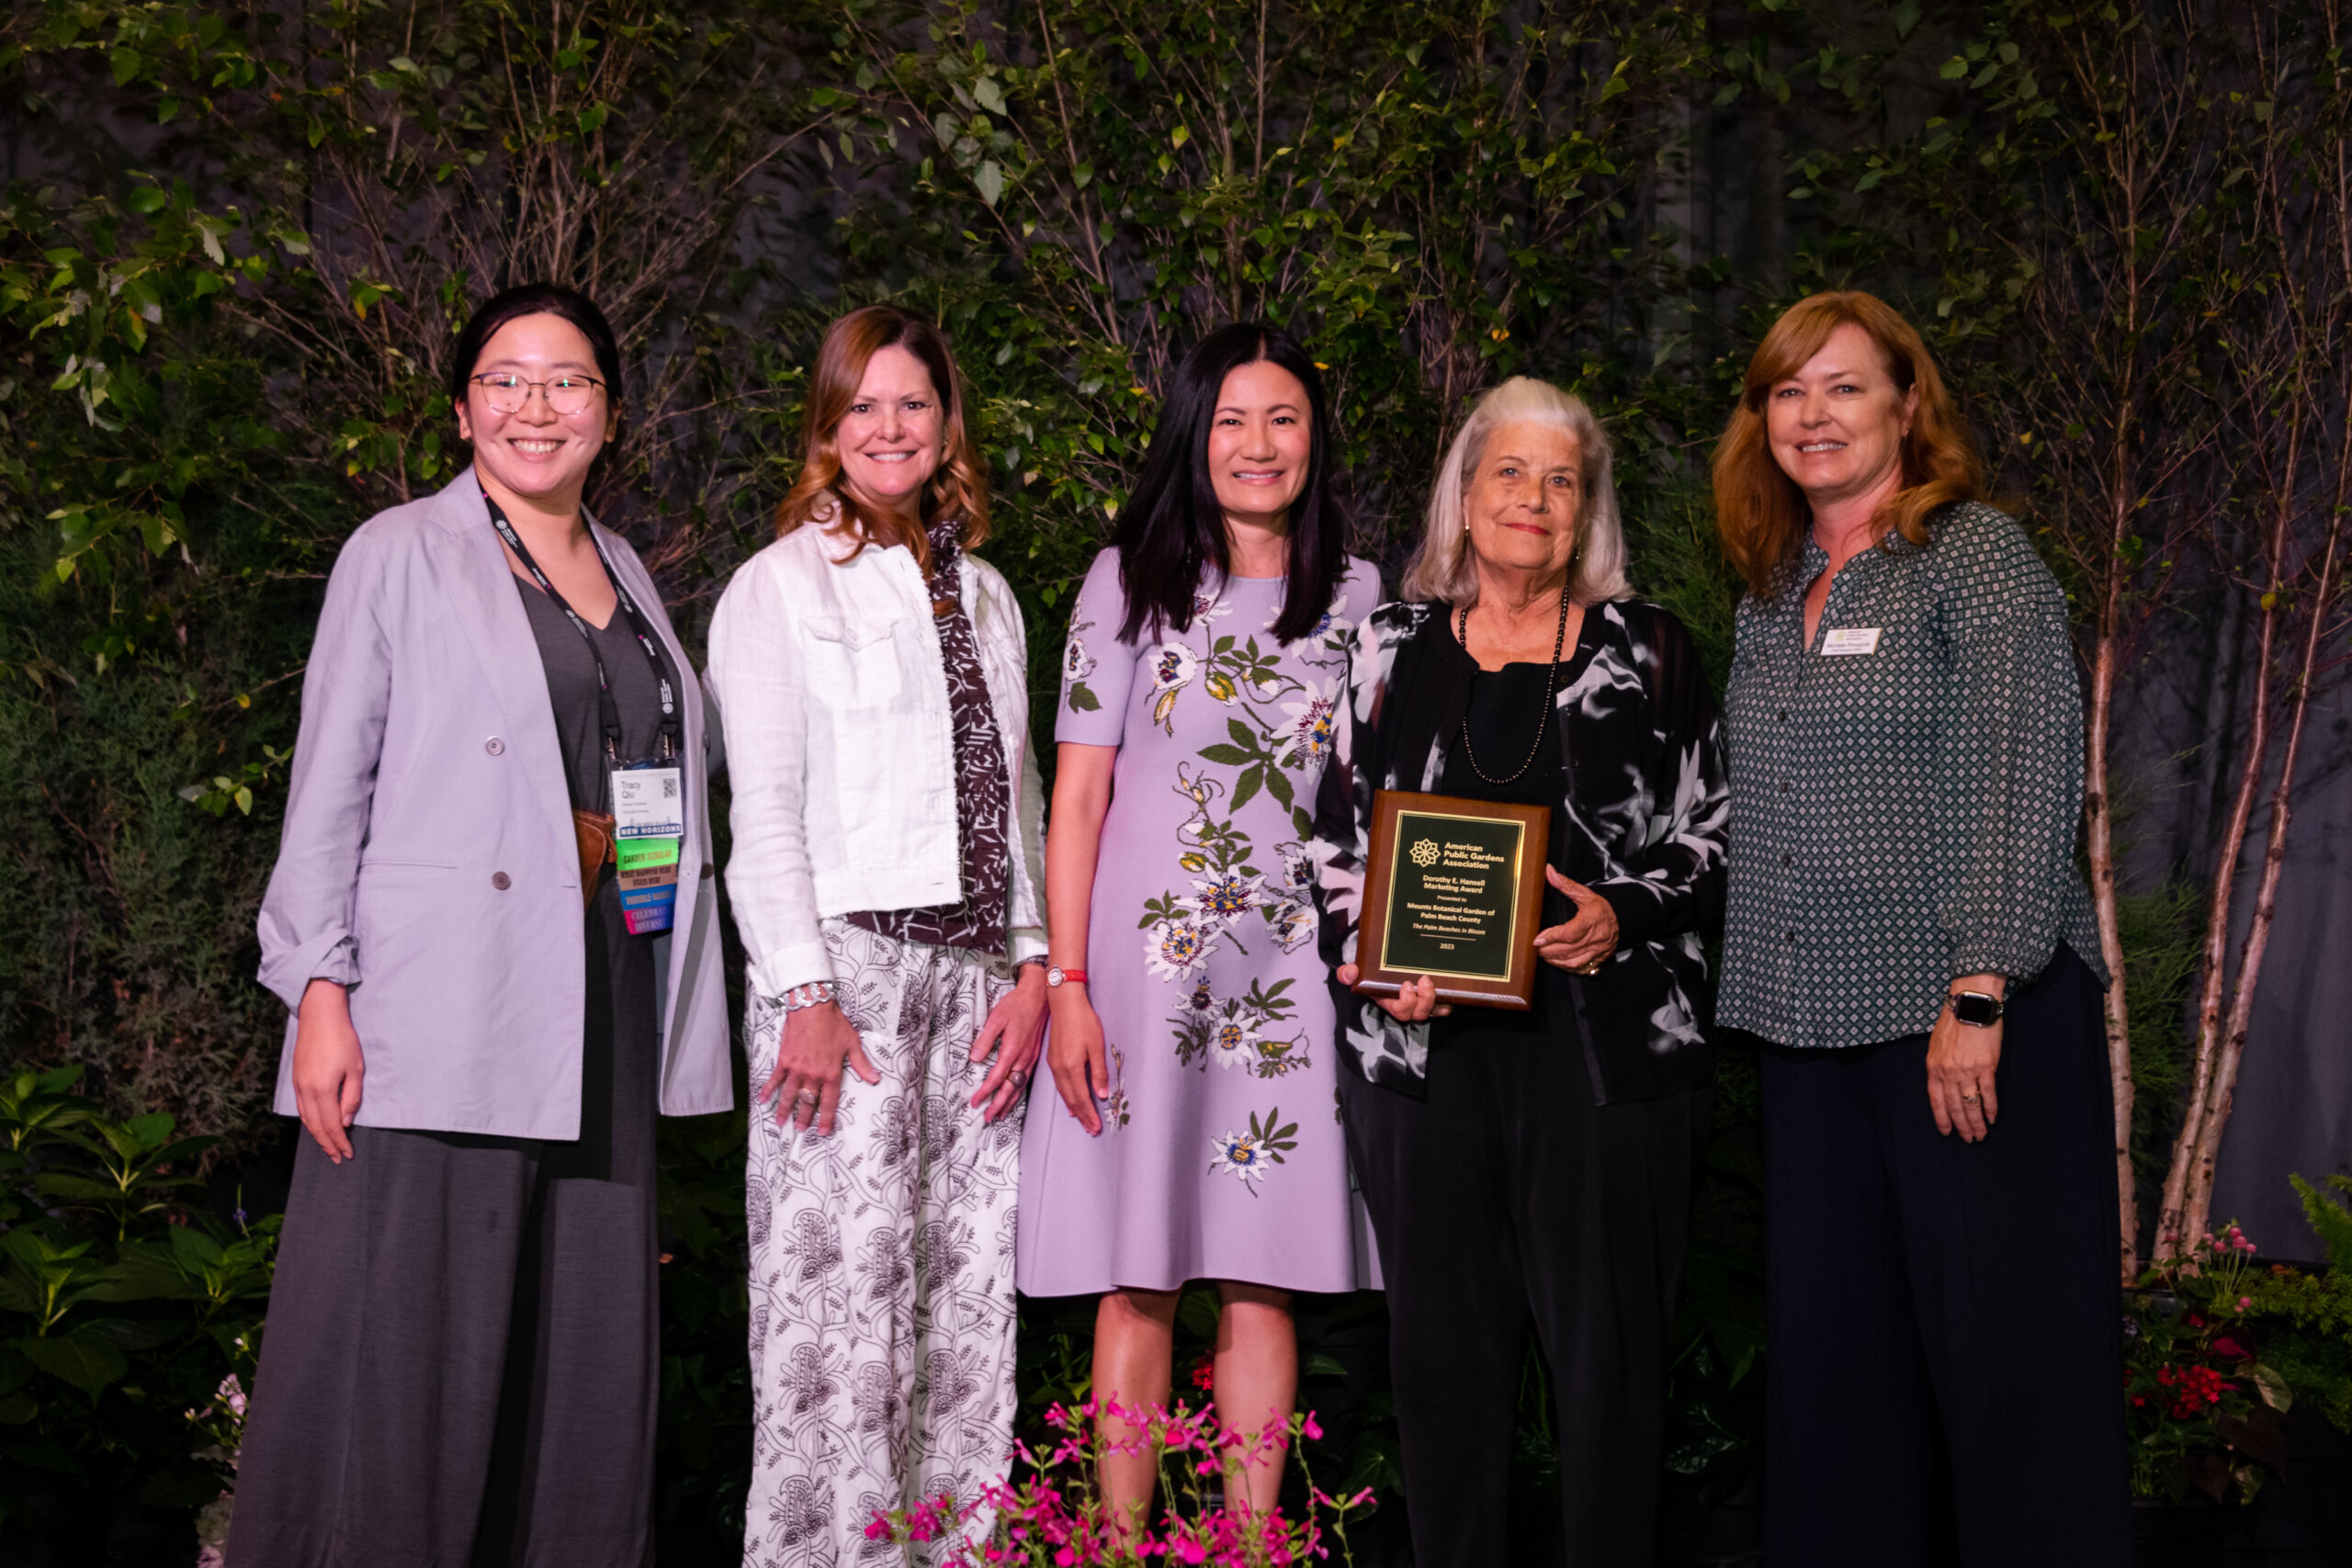 Mounts Botanical Garden received the Dorothy E. Hansell Marketing Award from the American Public Gardens Association at annual APGA conference in Fort Worth, Texas. (L-R: 2023 APGA Awards Committee Co-Chair Tracy Qiu, Mounts Associate Director of Marketing & Communications Misty Stoller, Mounts Curator-Director Rochelle Wolberg, Mounts Board Member and Past President Paton White, APGA President Michelle Provaznik.